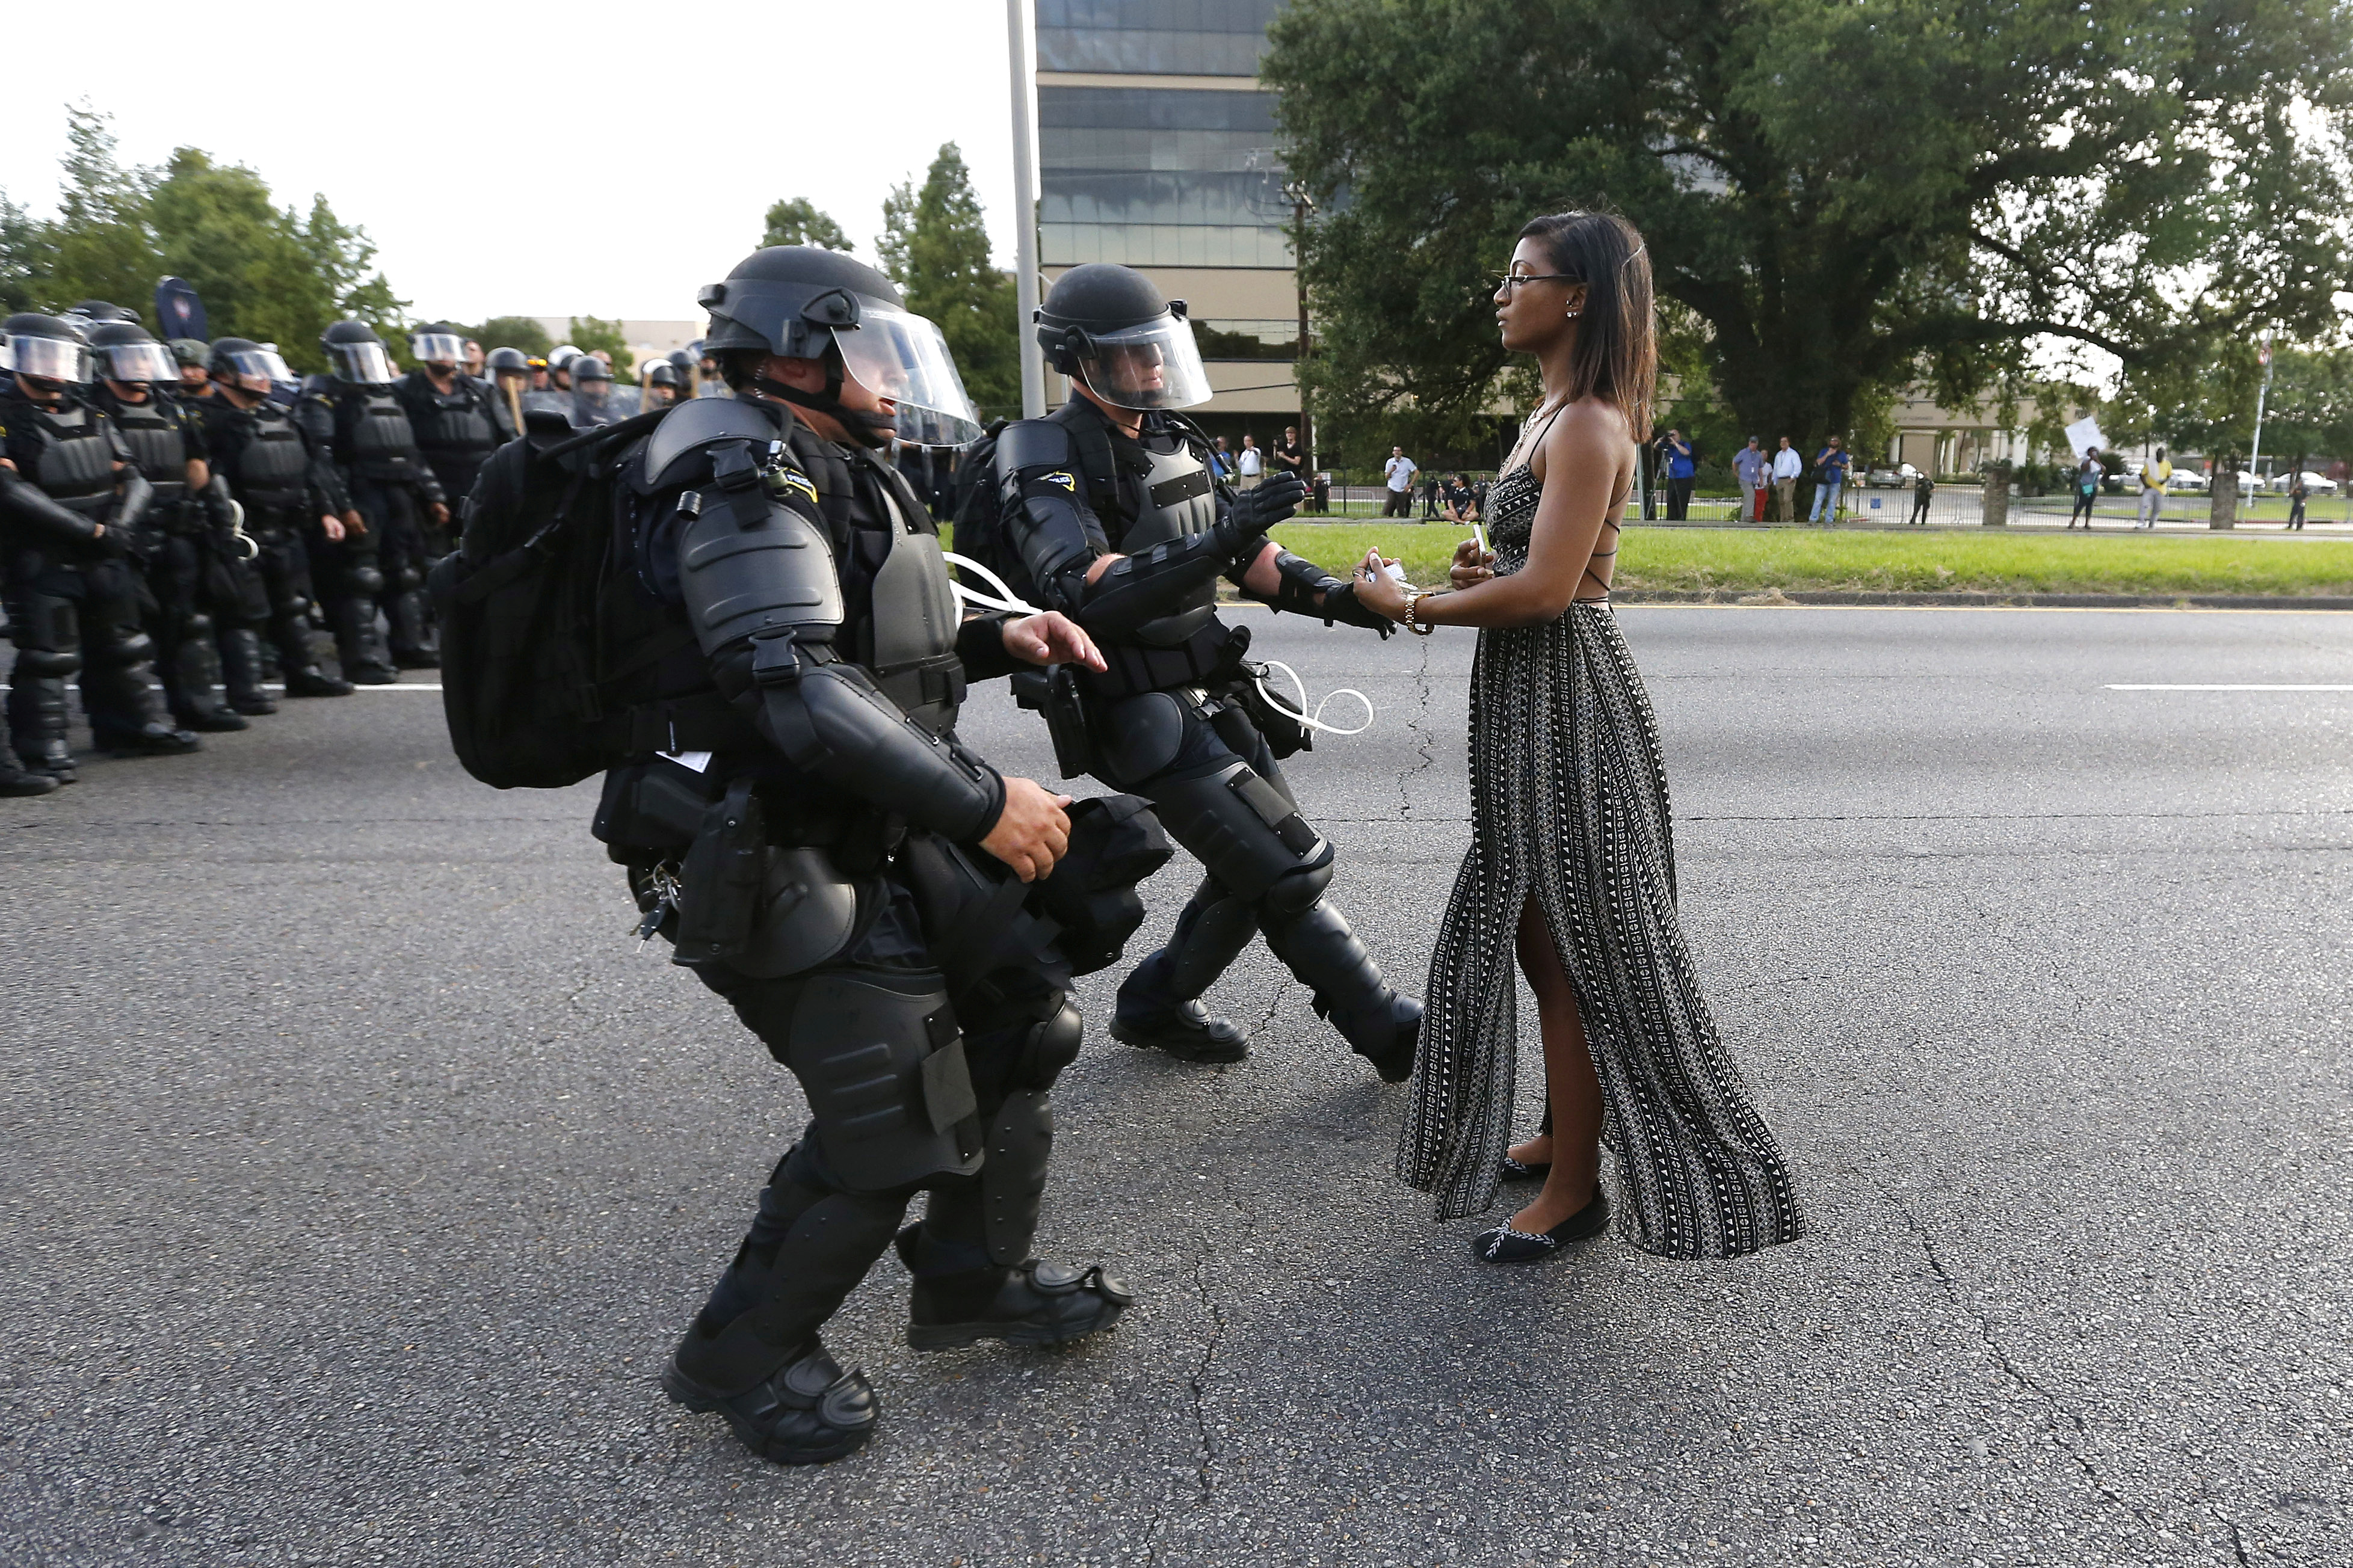 Ieshia Evans, a nurse from Pennsylvania, stands alone on a street as police in riot gear move to arrest her.